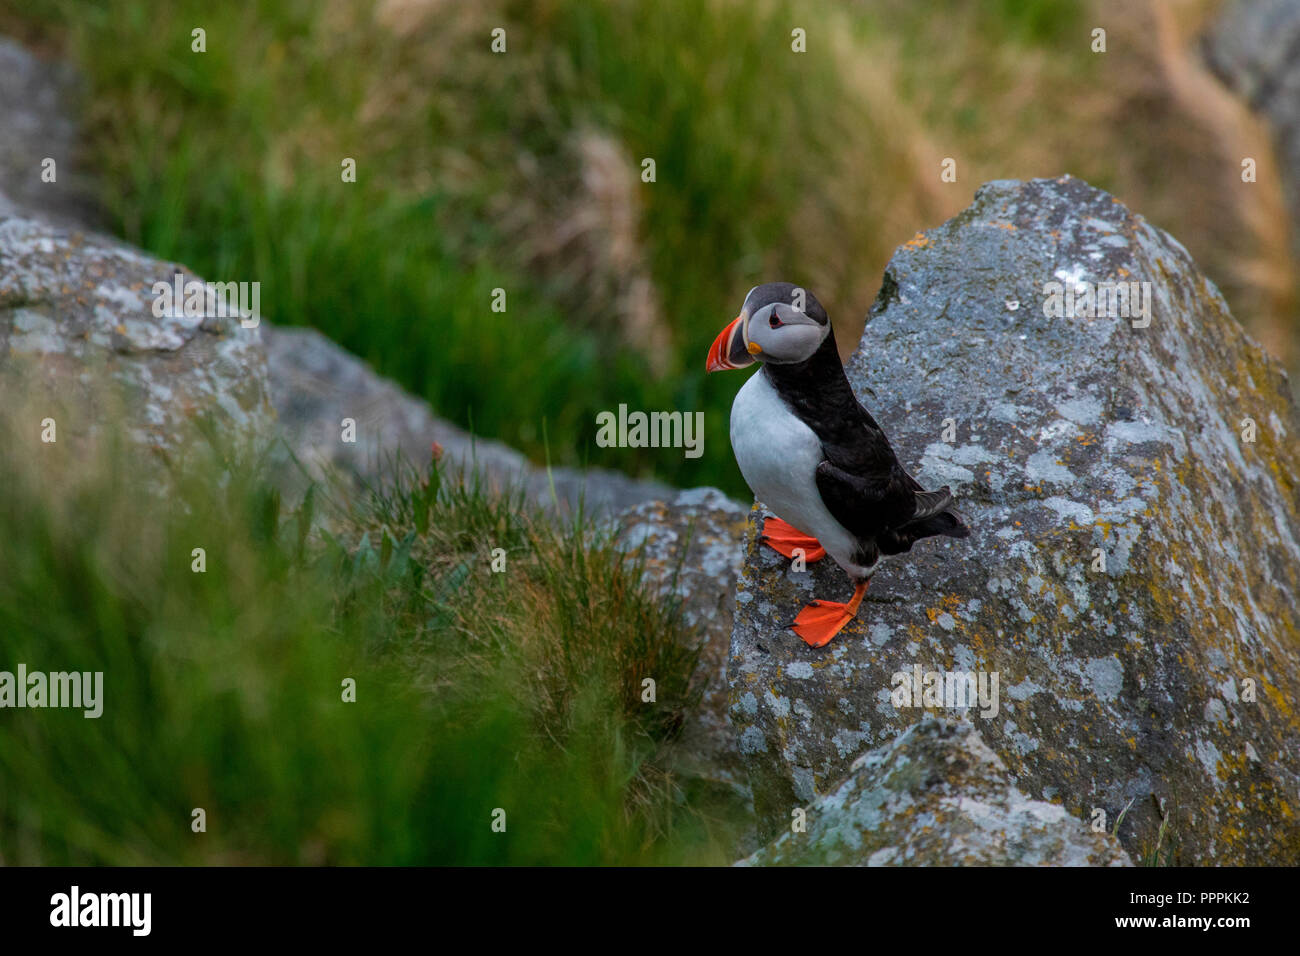 Puffin (Fratercula arctica), Runde, More og Romsdal, Norway Stock Photo